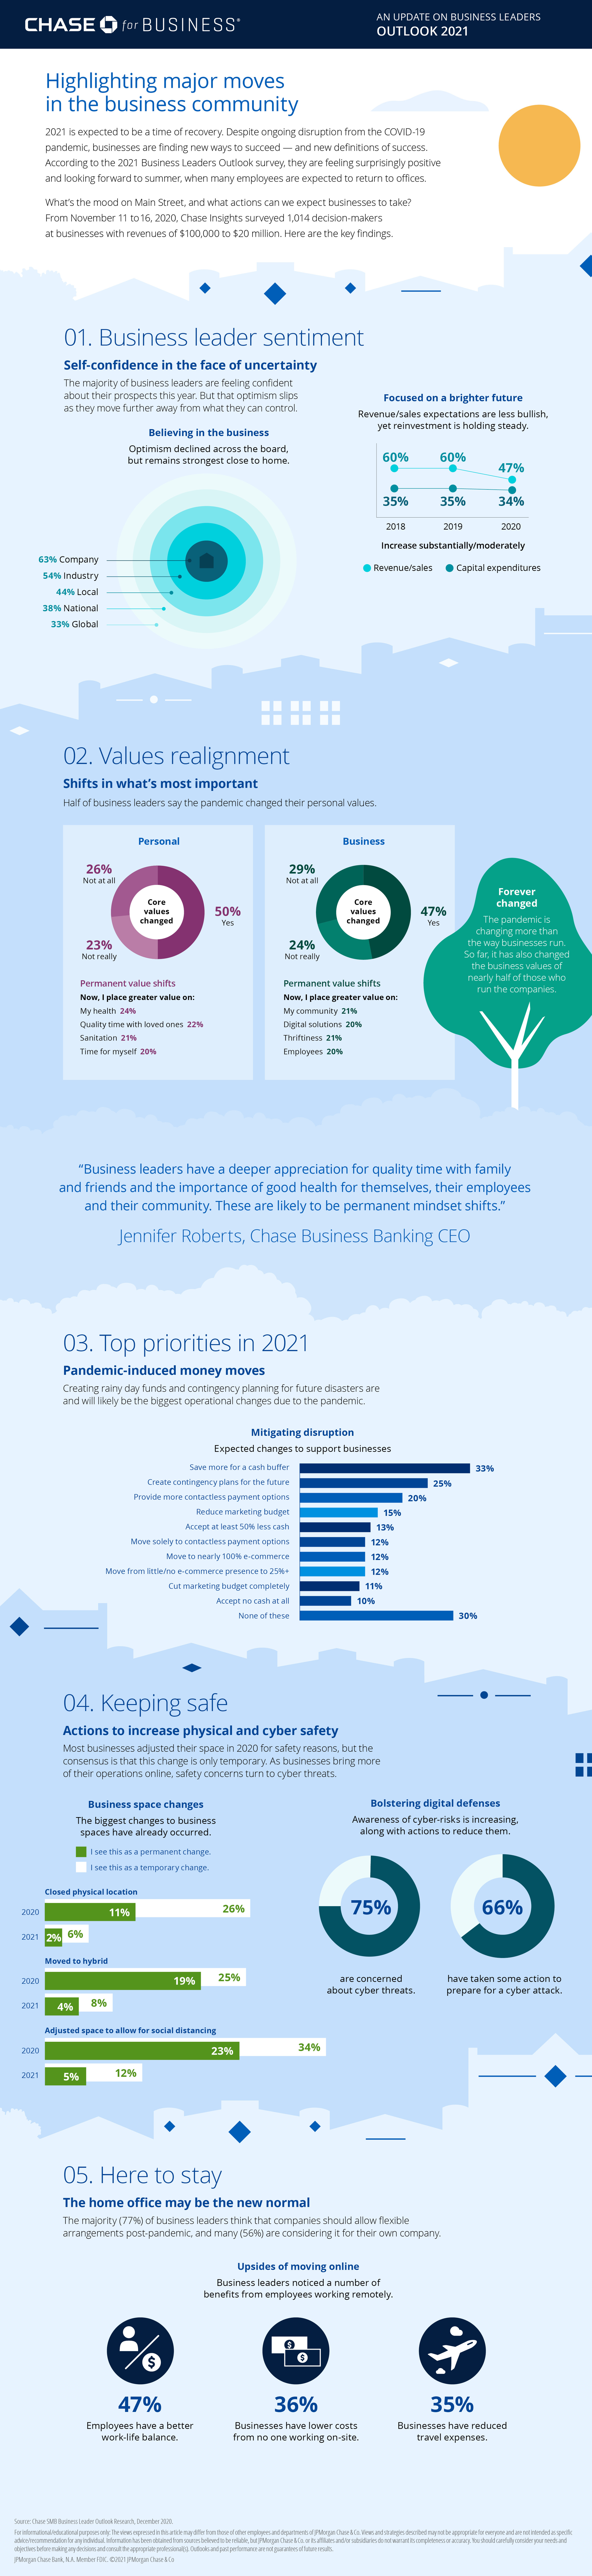 Chase 2021 Business Leaders Outlook infographic on where leaders expect businesses to head this year.